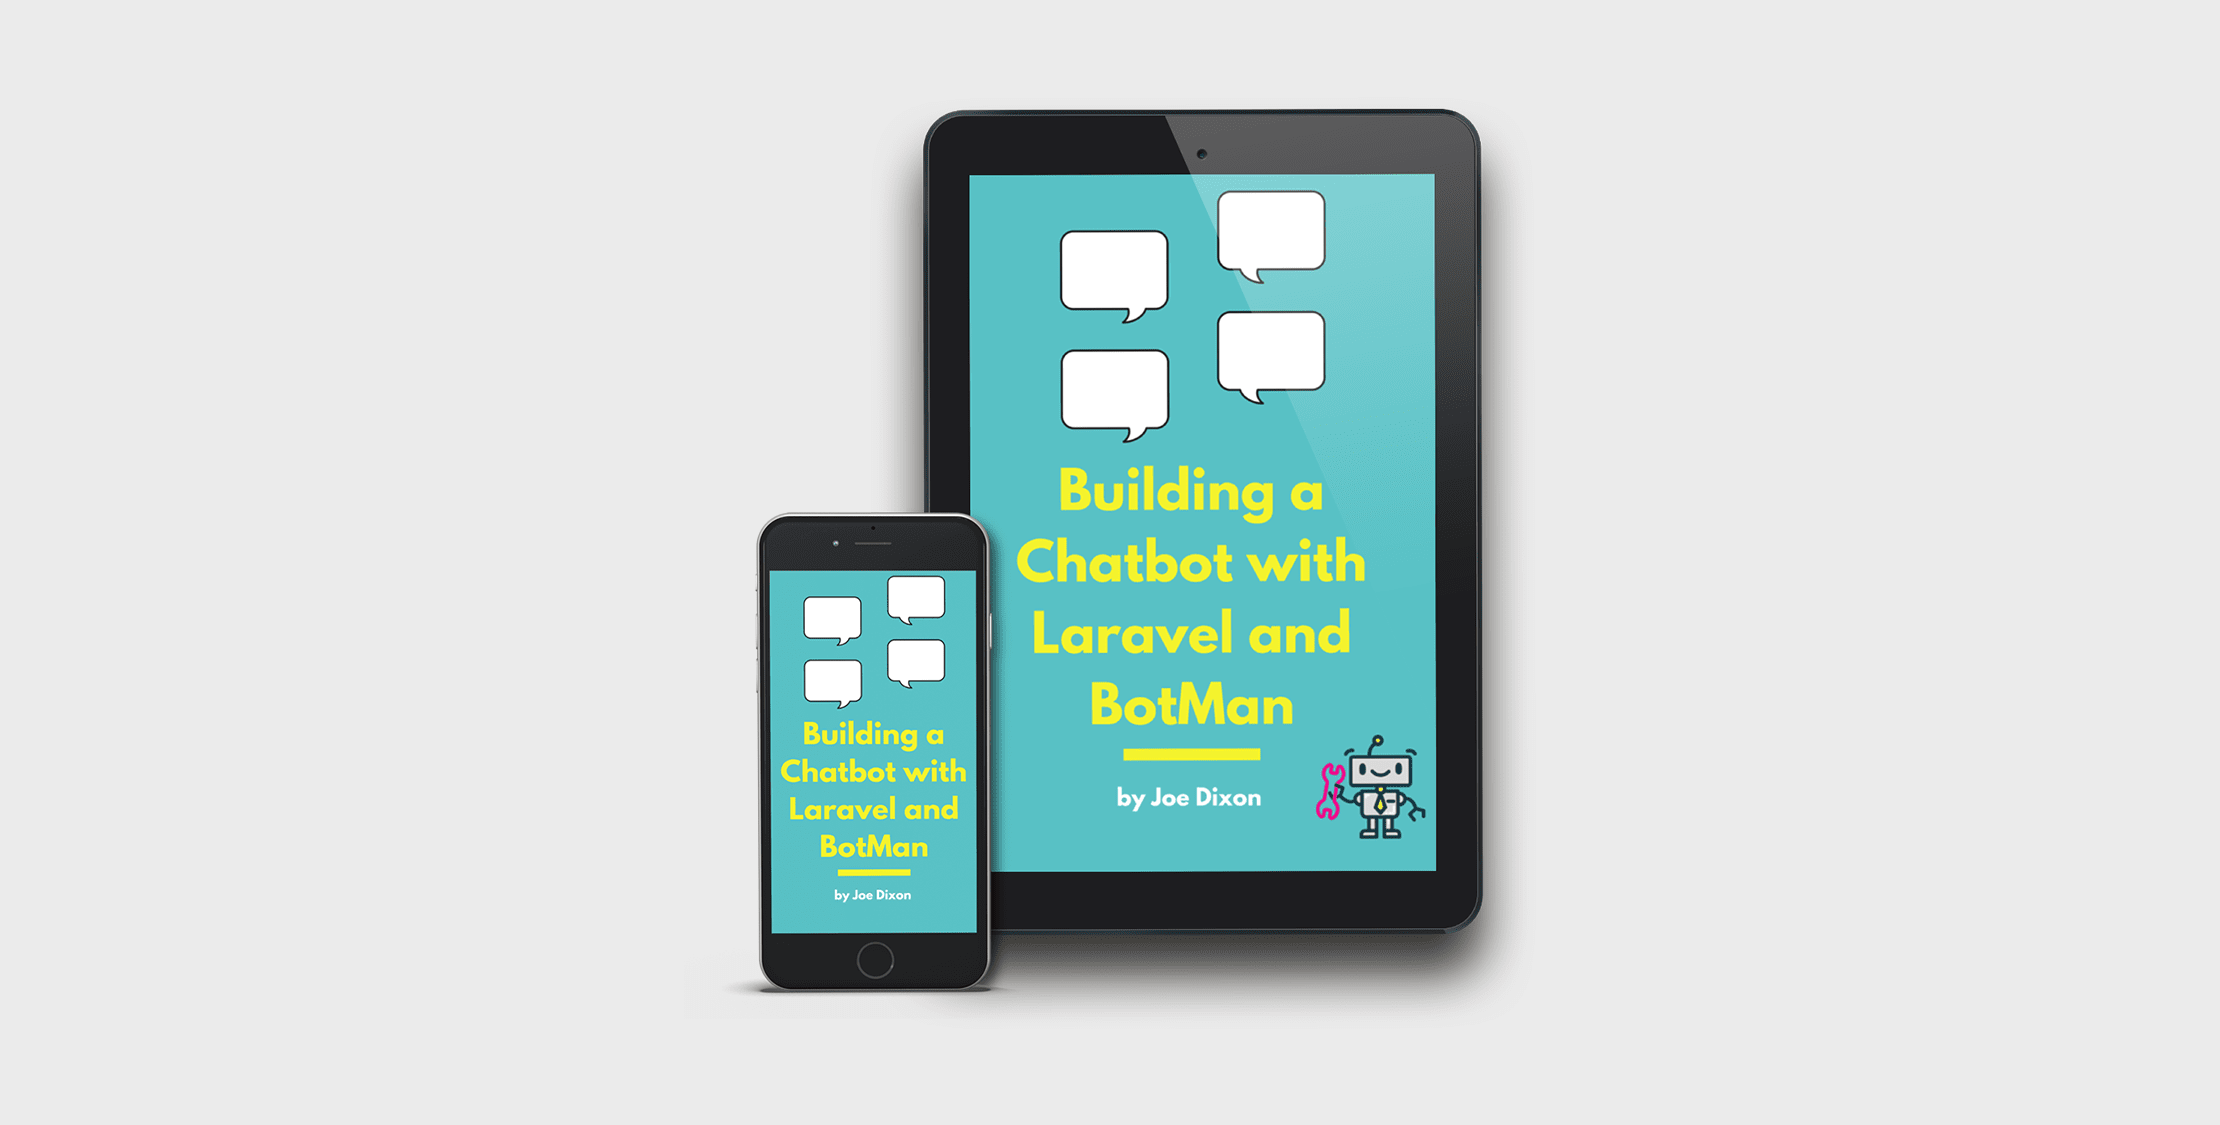 Announcing Building a Chatbot with Laravel and BotMan image